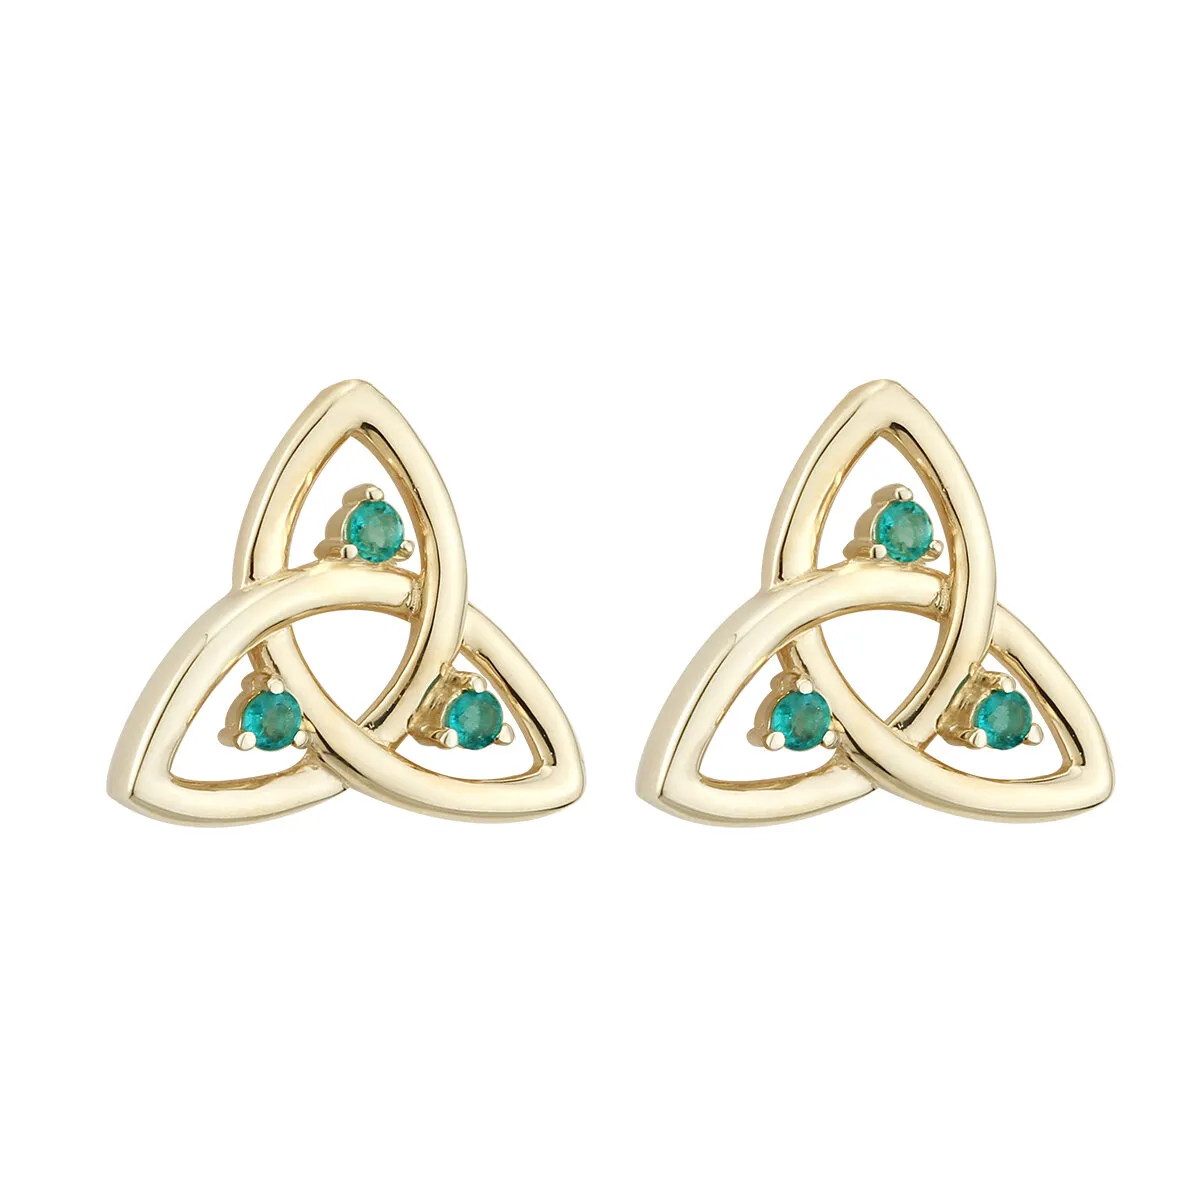 14K Gold Trinity Knot Stud Earrings with Emeralds...